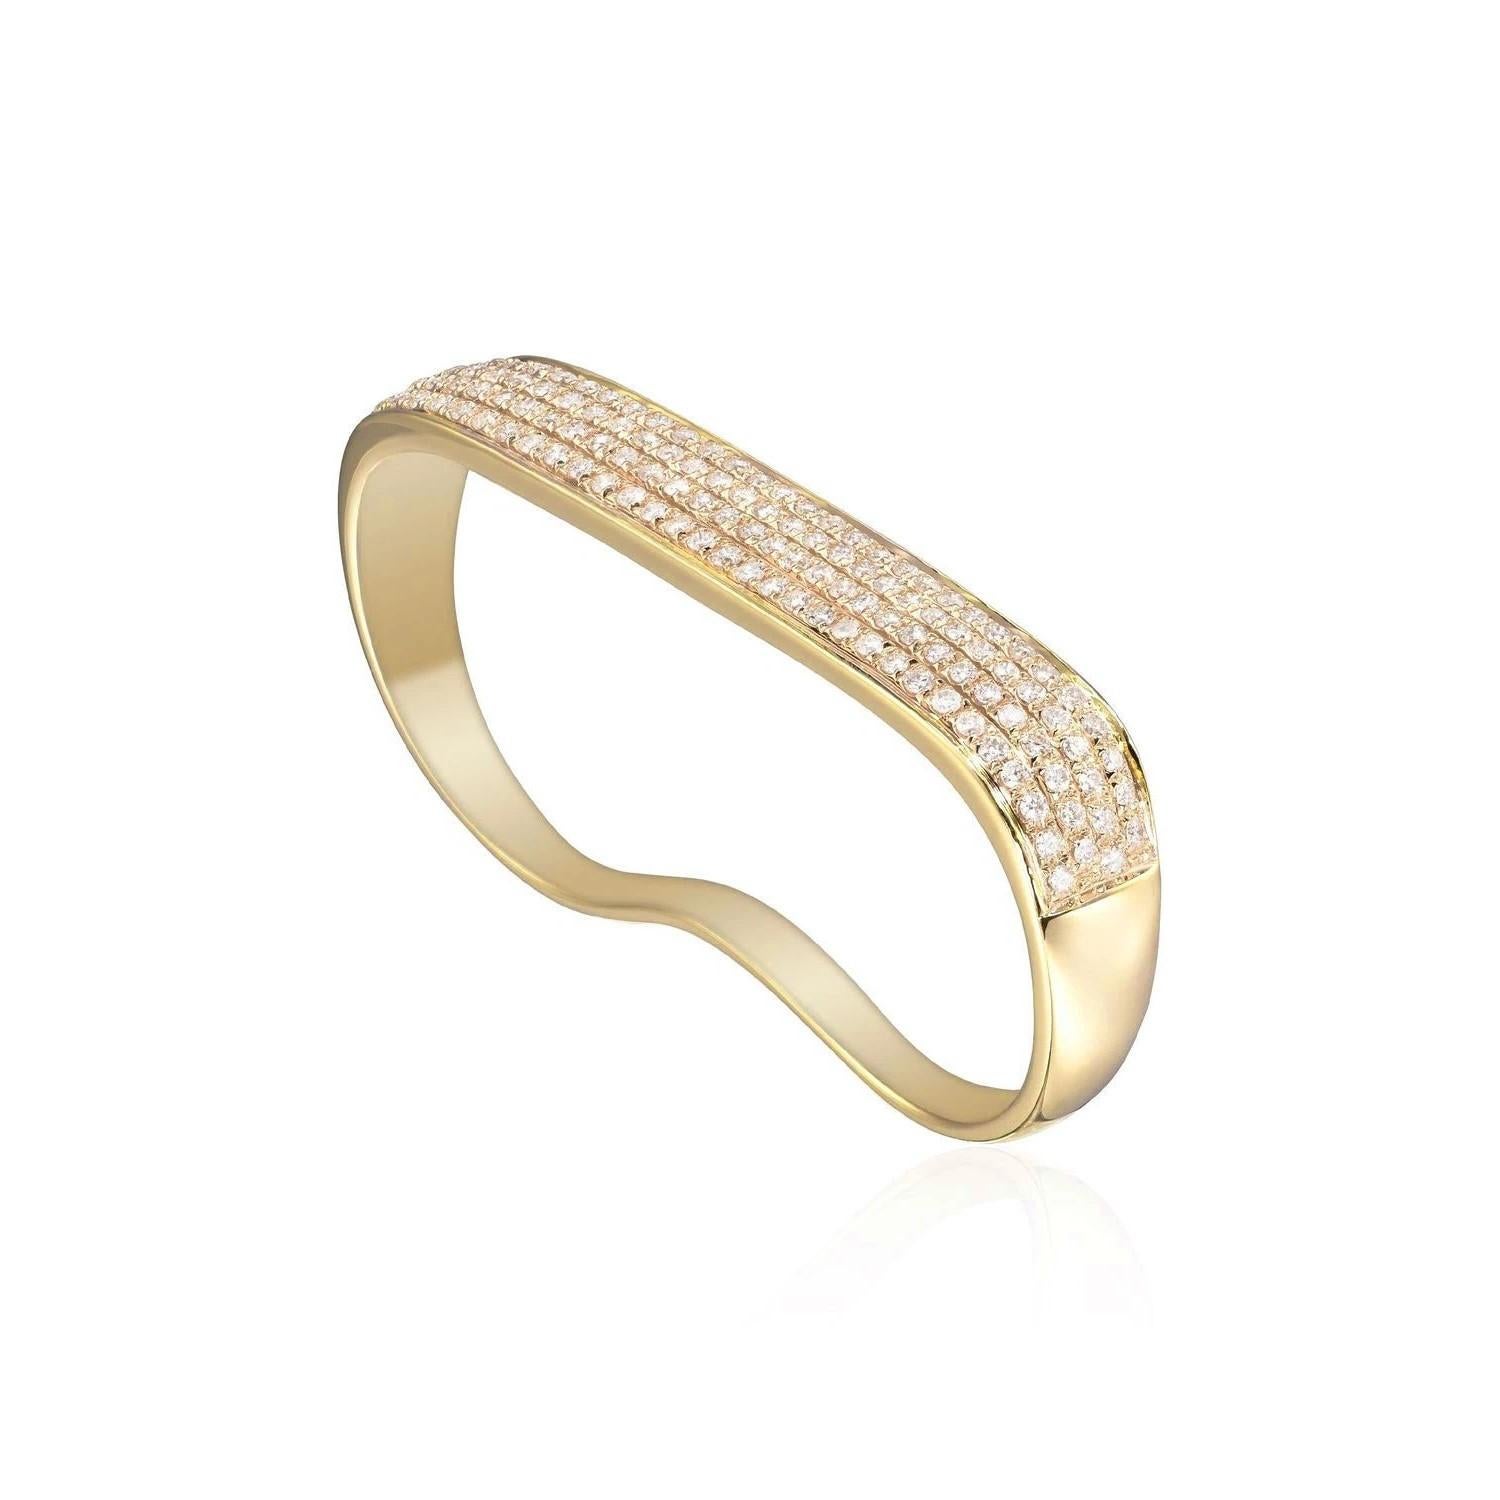 AS29
This statement 18kt yellow gold Lana 2-fingers diamond ring from AS29 is simply striking. 
Total Carat Weight: 0.61 cts.
Size: US 6
